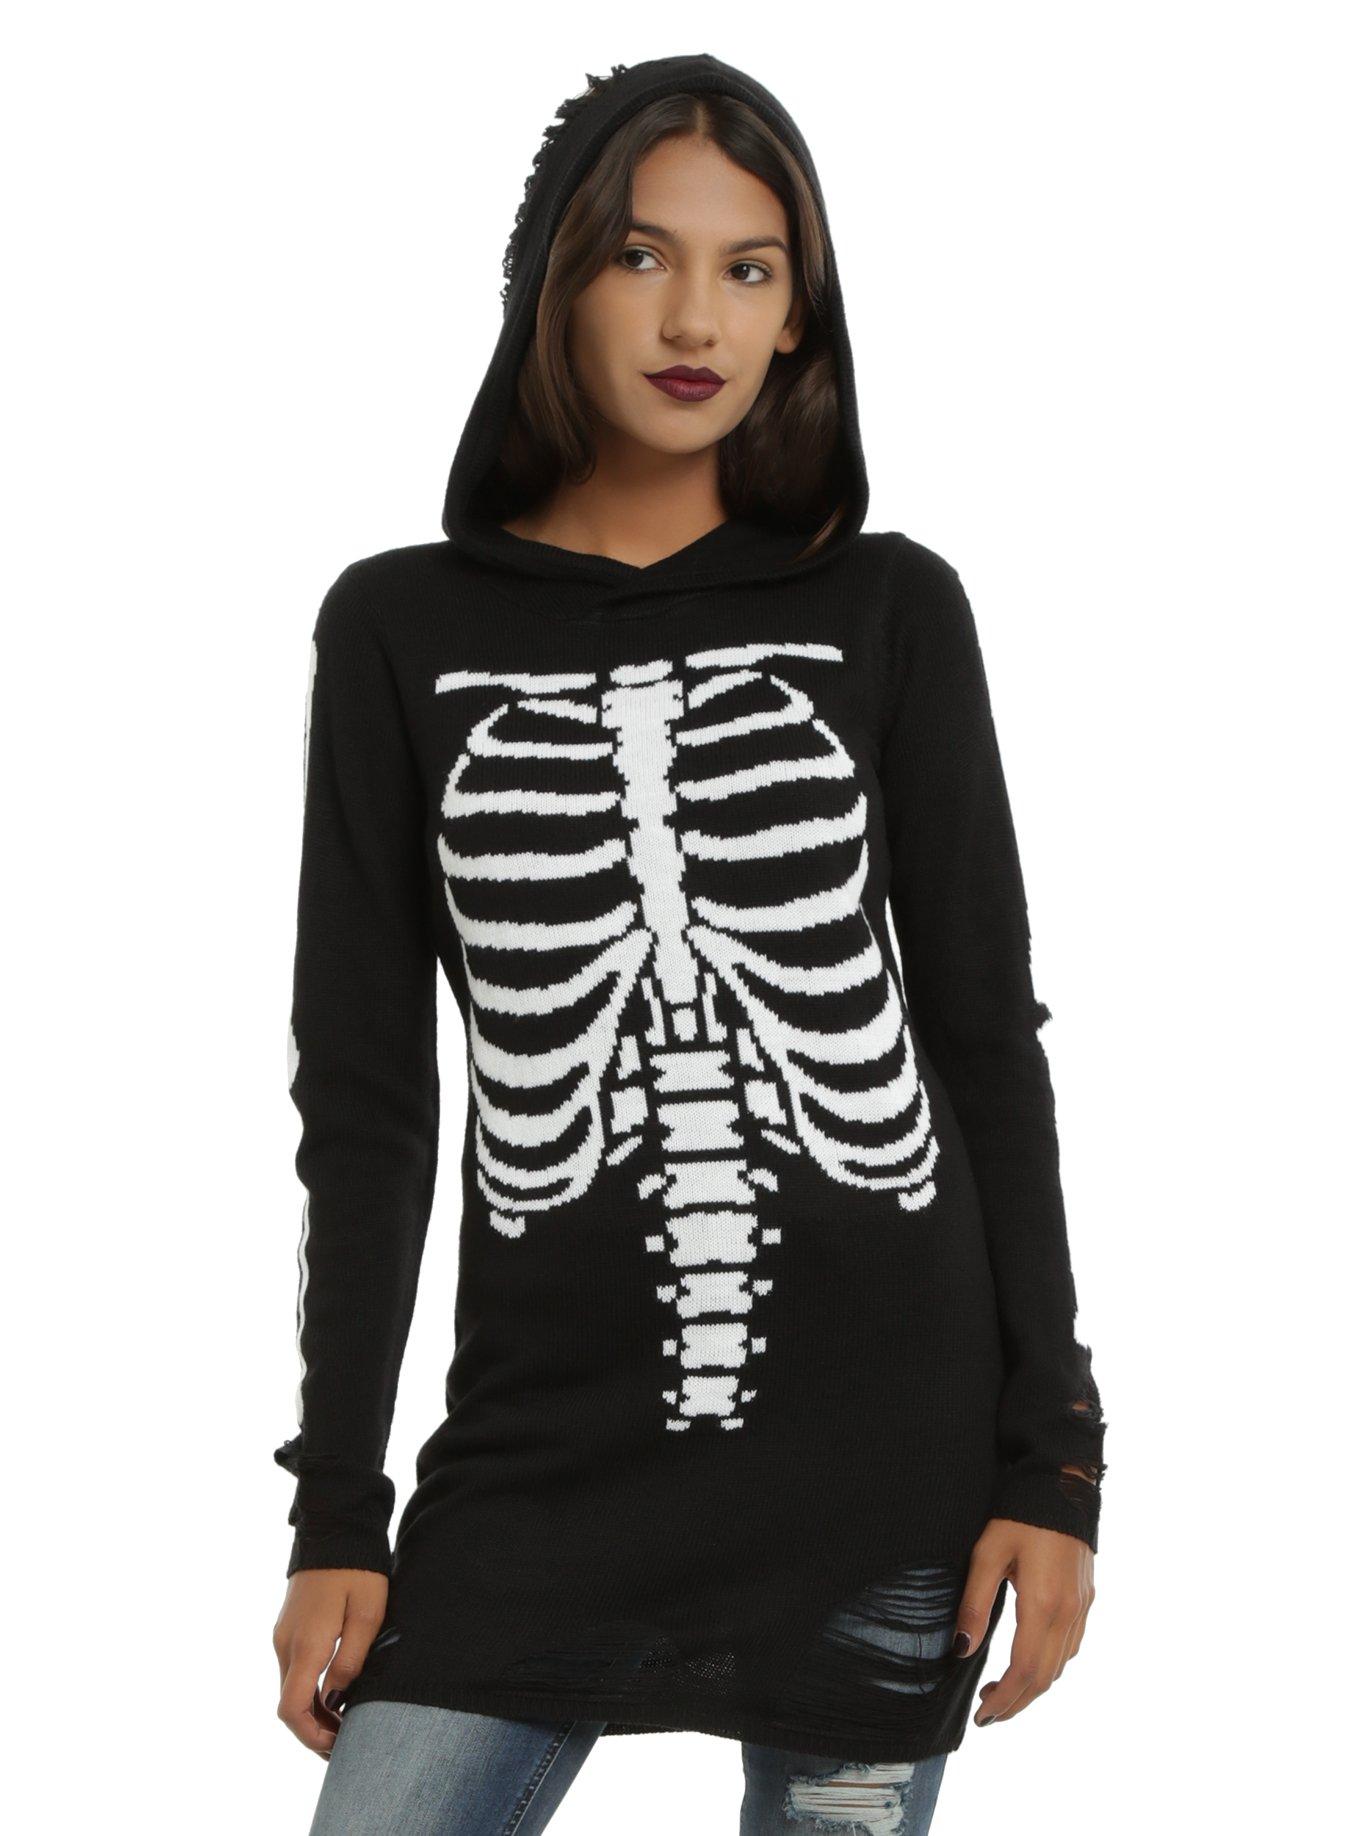 Rib Cage Destructed Girls Hooded Tunic Sweater, BLACK, hi-res